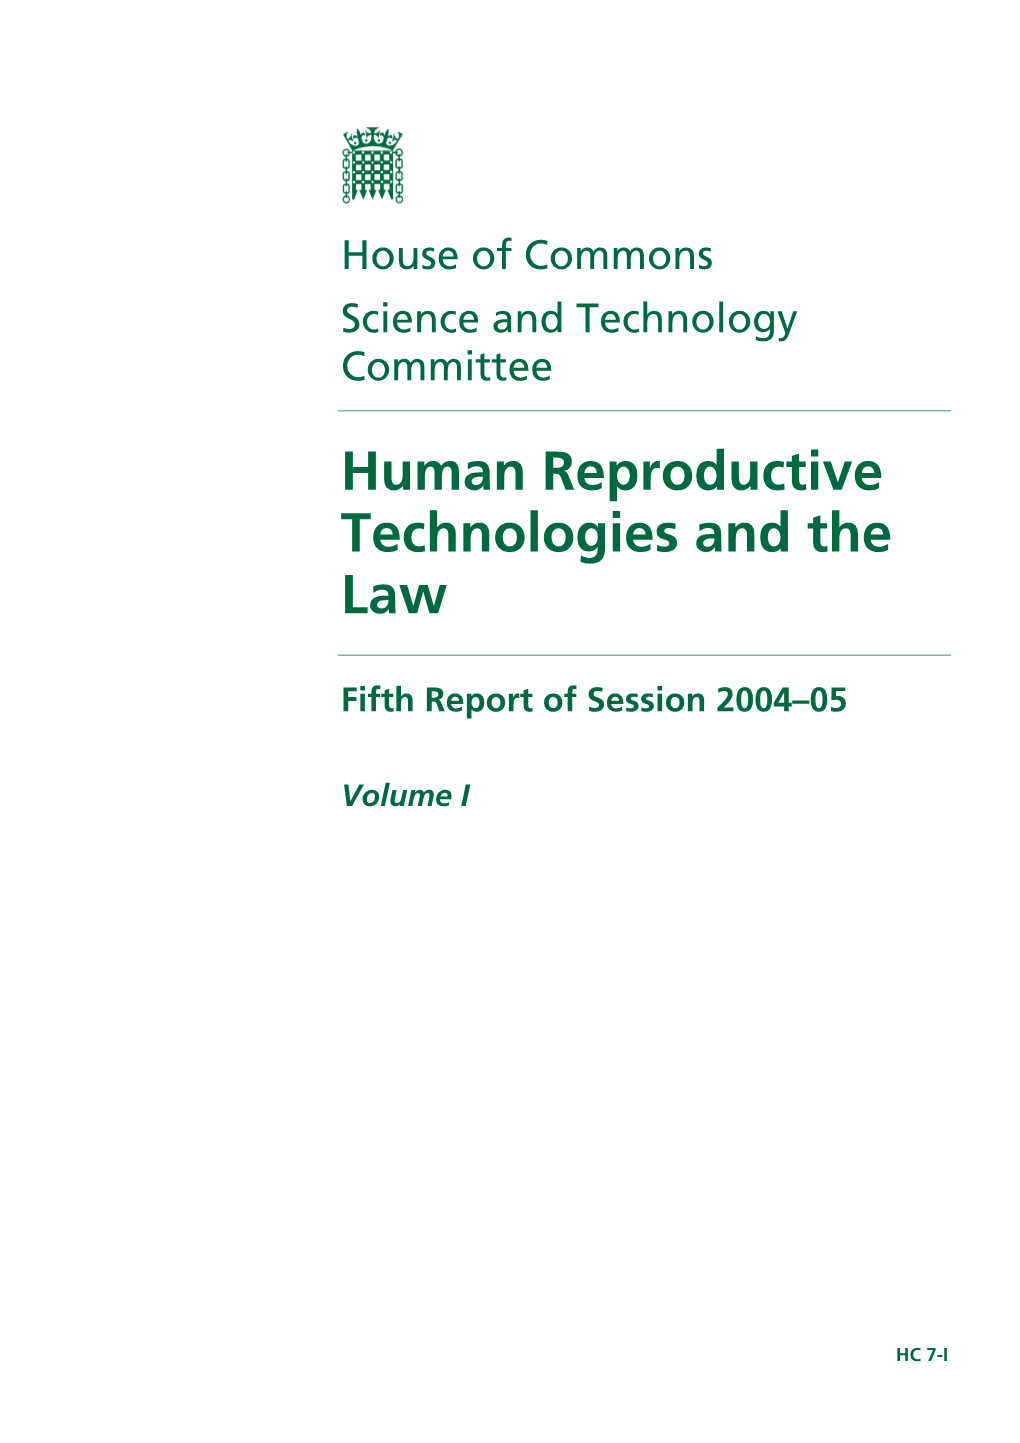 Human Reproductive Technologies and the Law